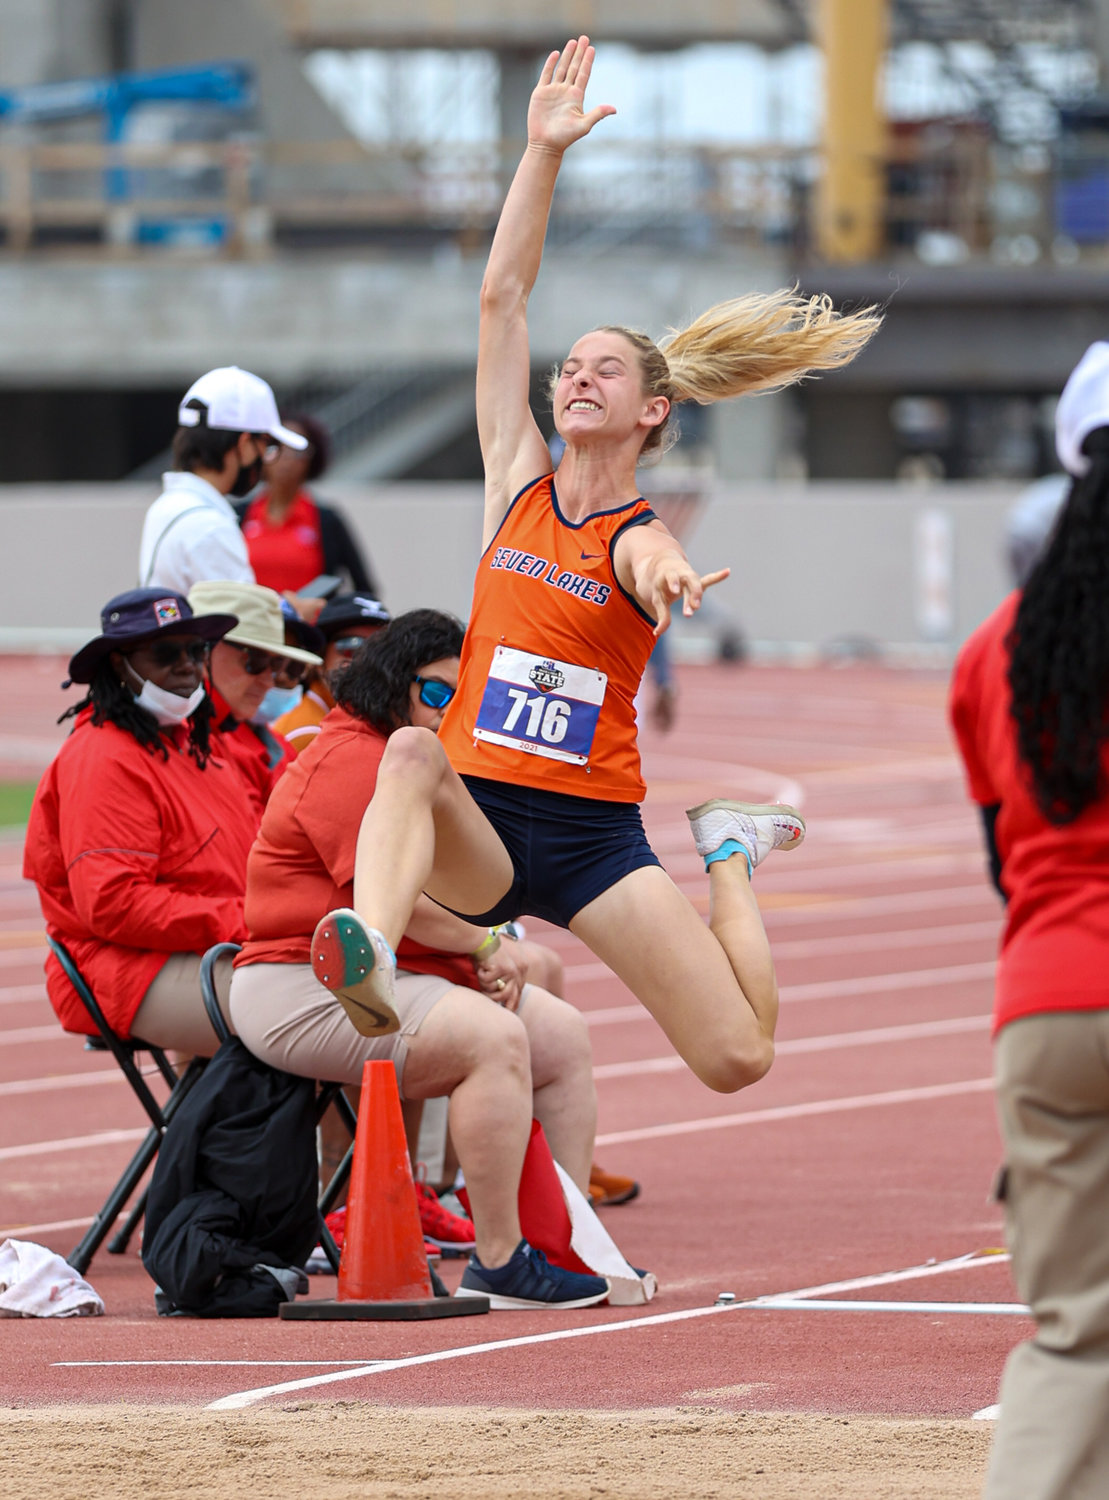 Paige Boucher competes in the Class 6A girls long jump event at the UIL State Track and Field Meet on May 8, 2021 at Mike A. Myers Stadium in Austin, Texas. Boucher finished sixth with a jump of 18-6.00.